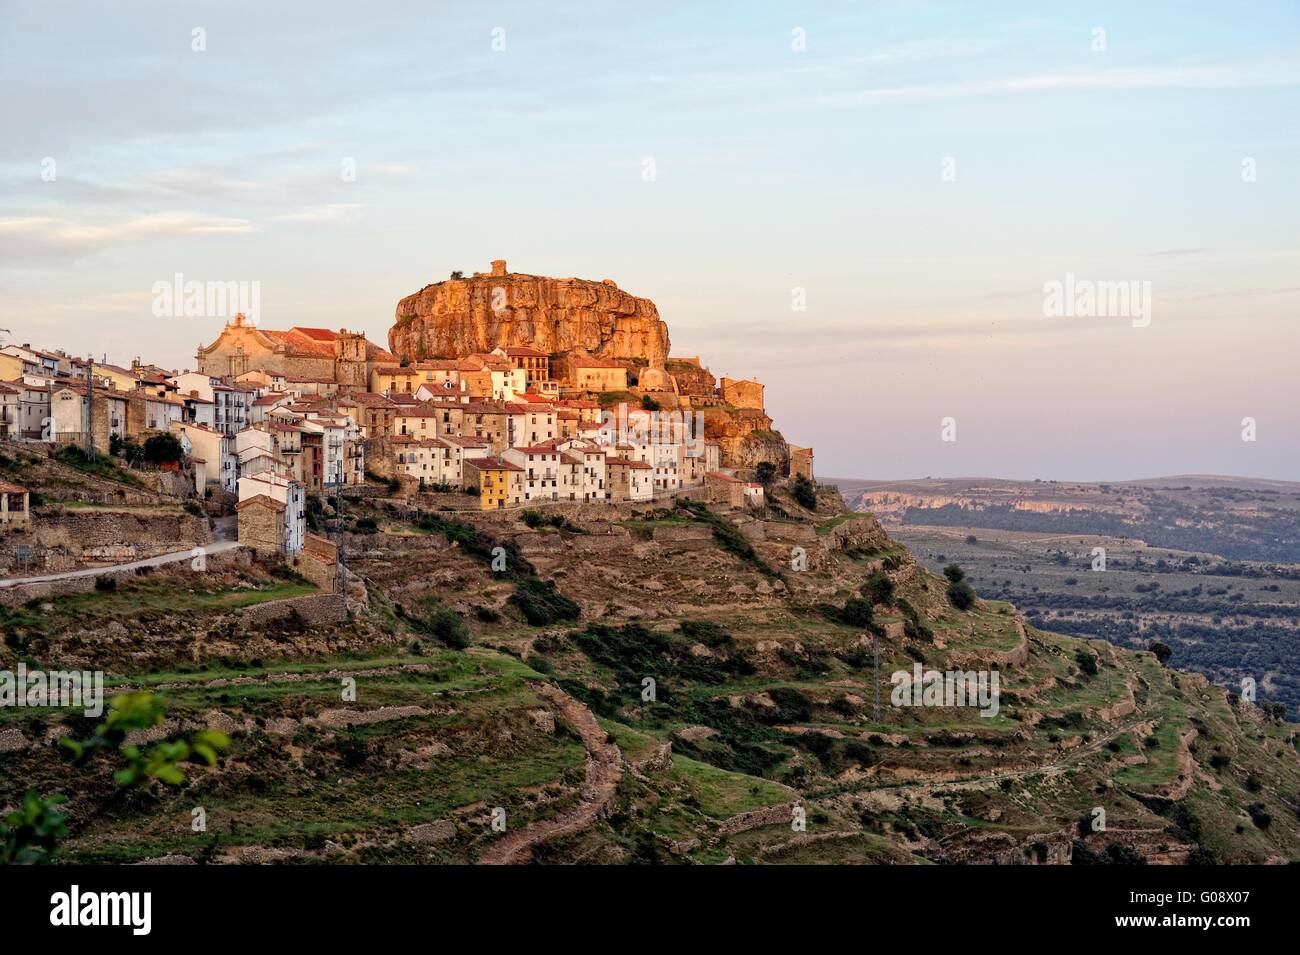 Sunset landscape mountain view of the old town Ares in Spain. Stock Photo